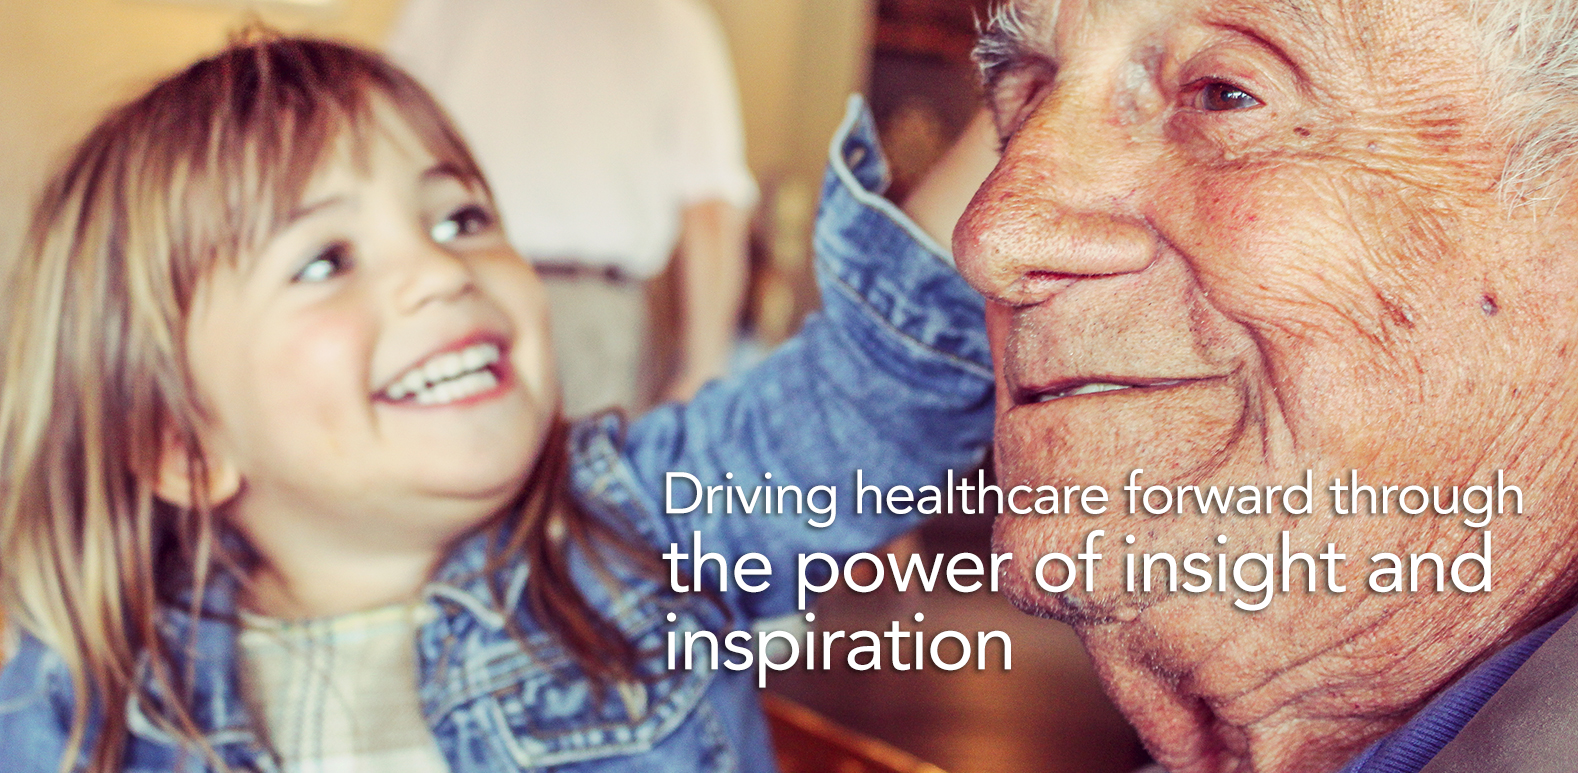 ampco home driving healthcare forward through the power of insight and inspiration